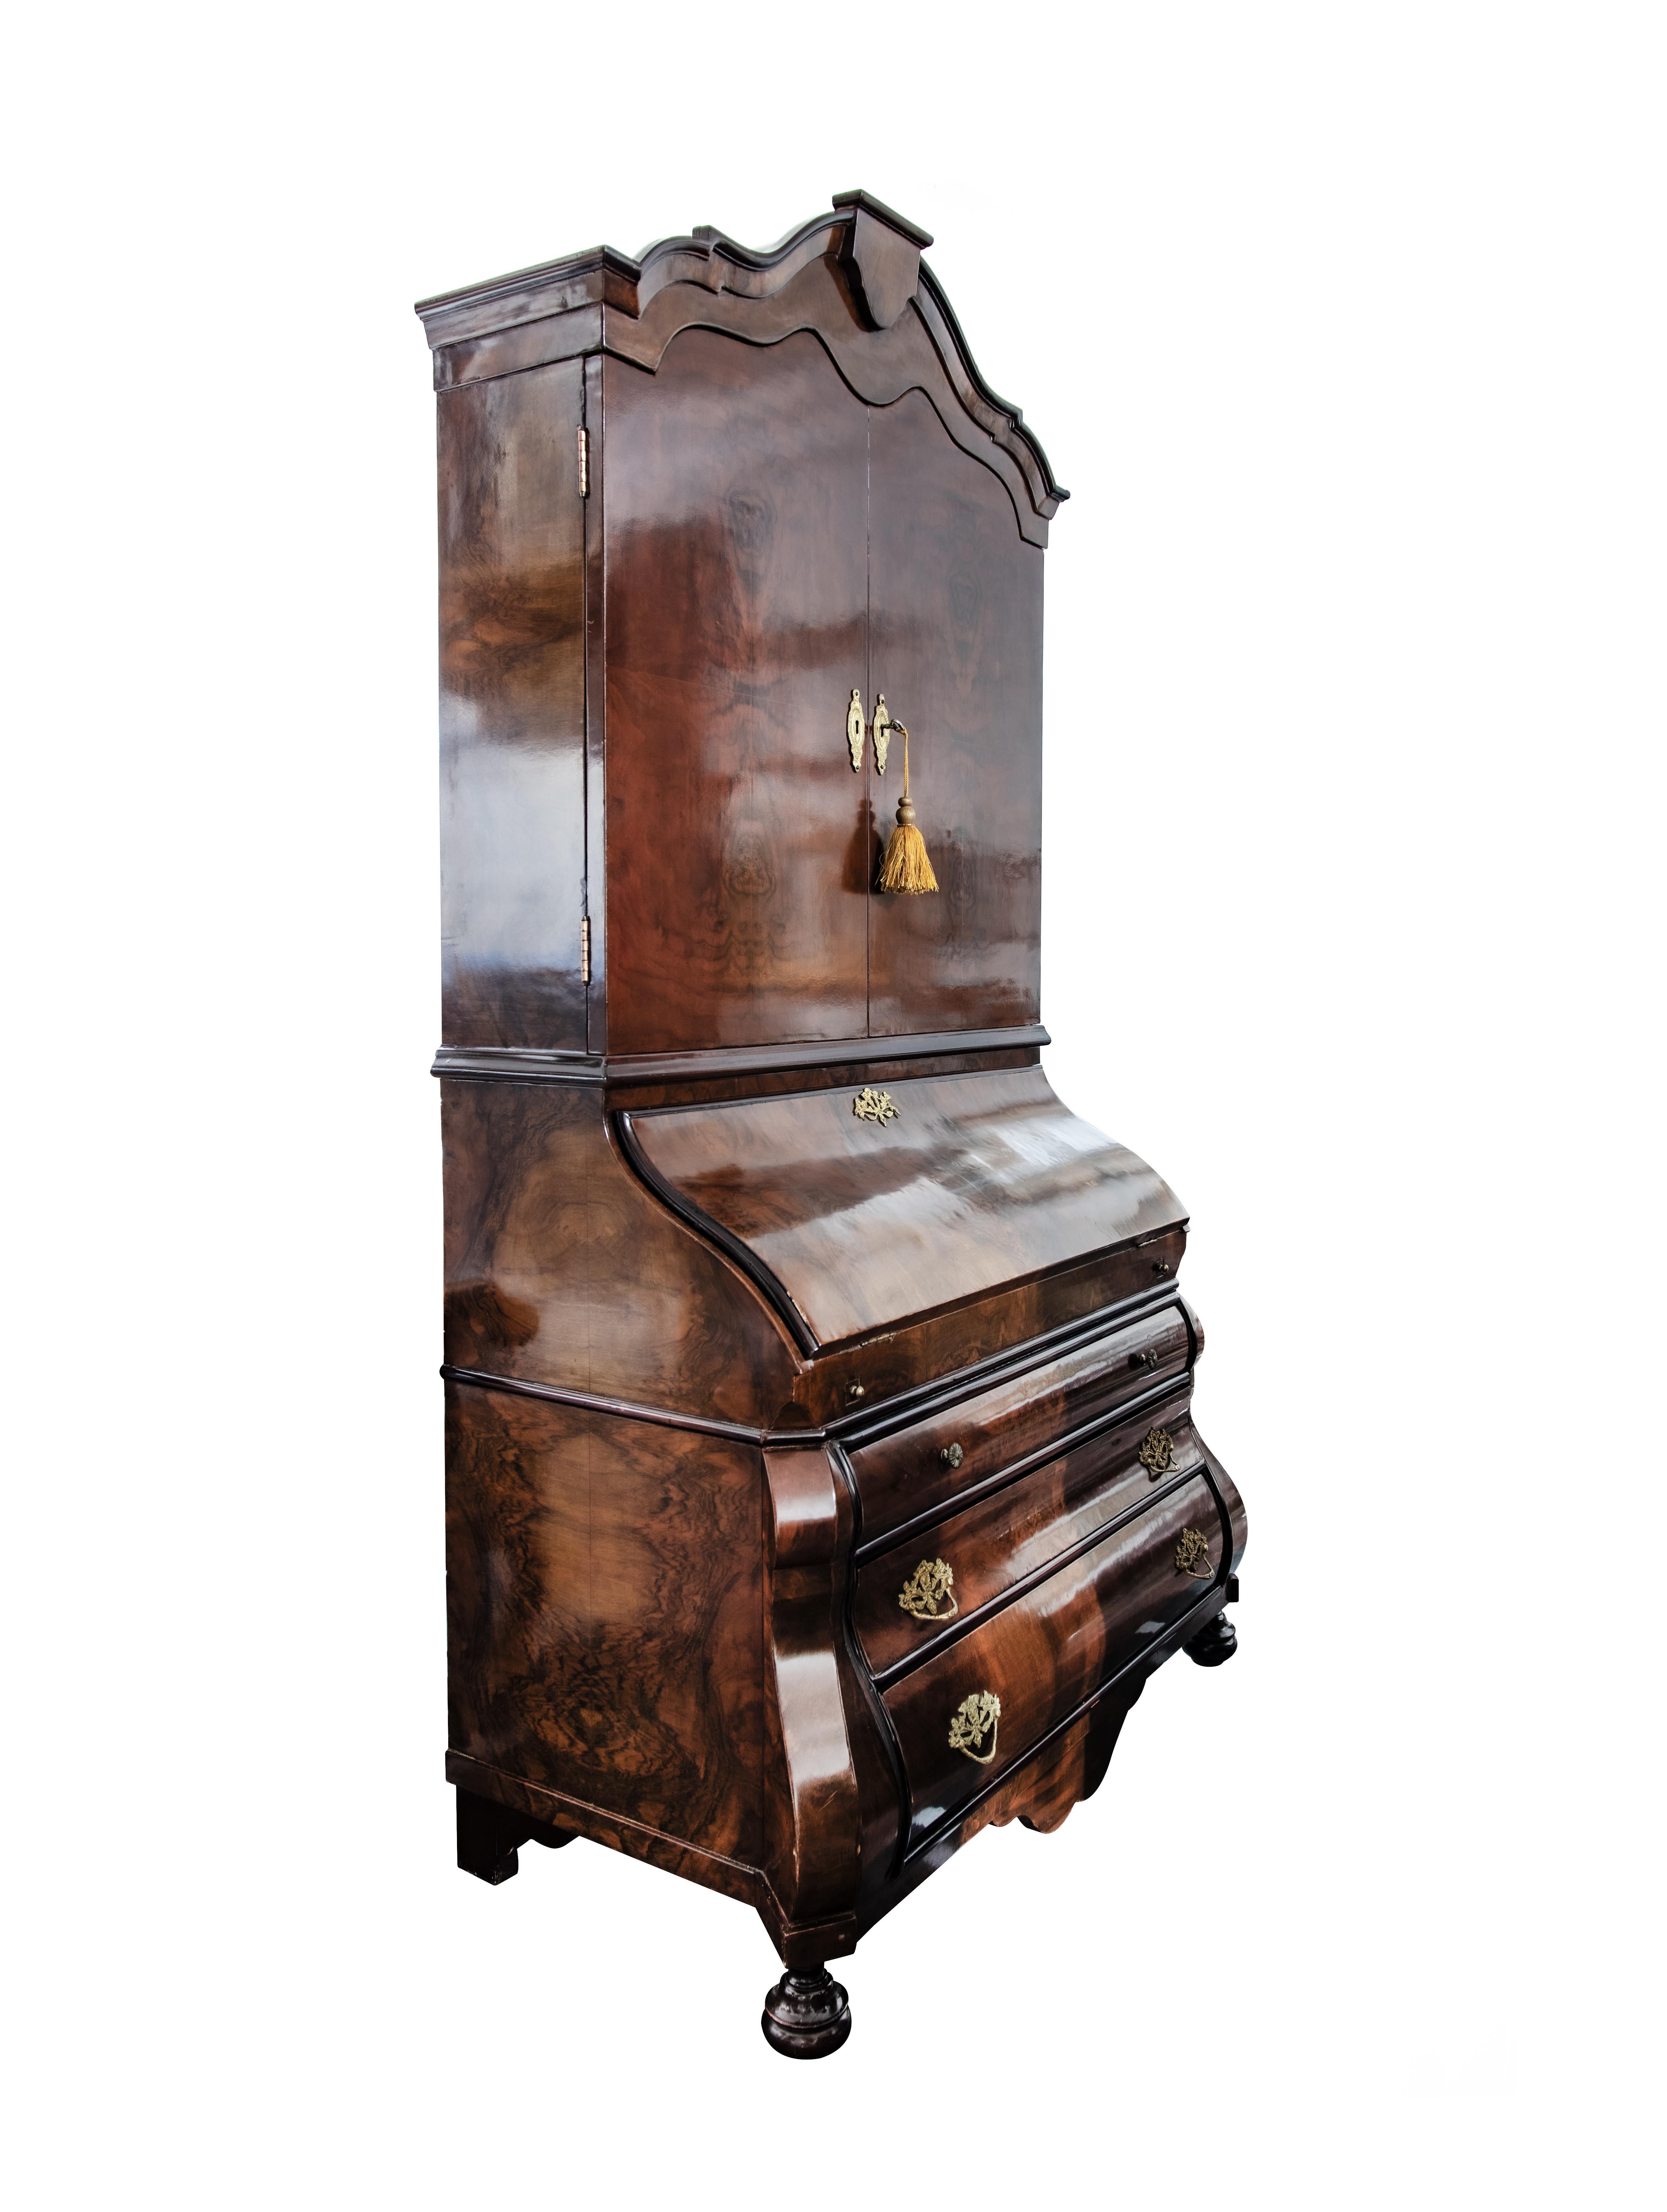 Wooden Highboard is an orginal desgn furniture item realized in Italy in the early 20th Century.

A very beautiful wood highboard with three drawers and an opening door in the higher part. Fine brass inserts that give a touch of elegant to this